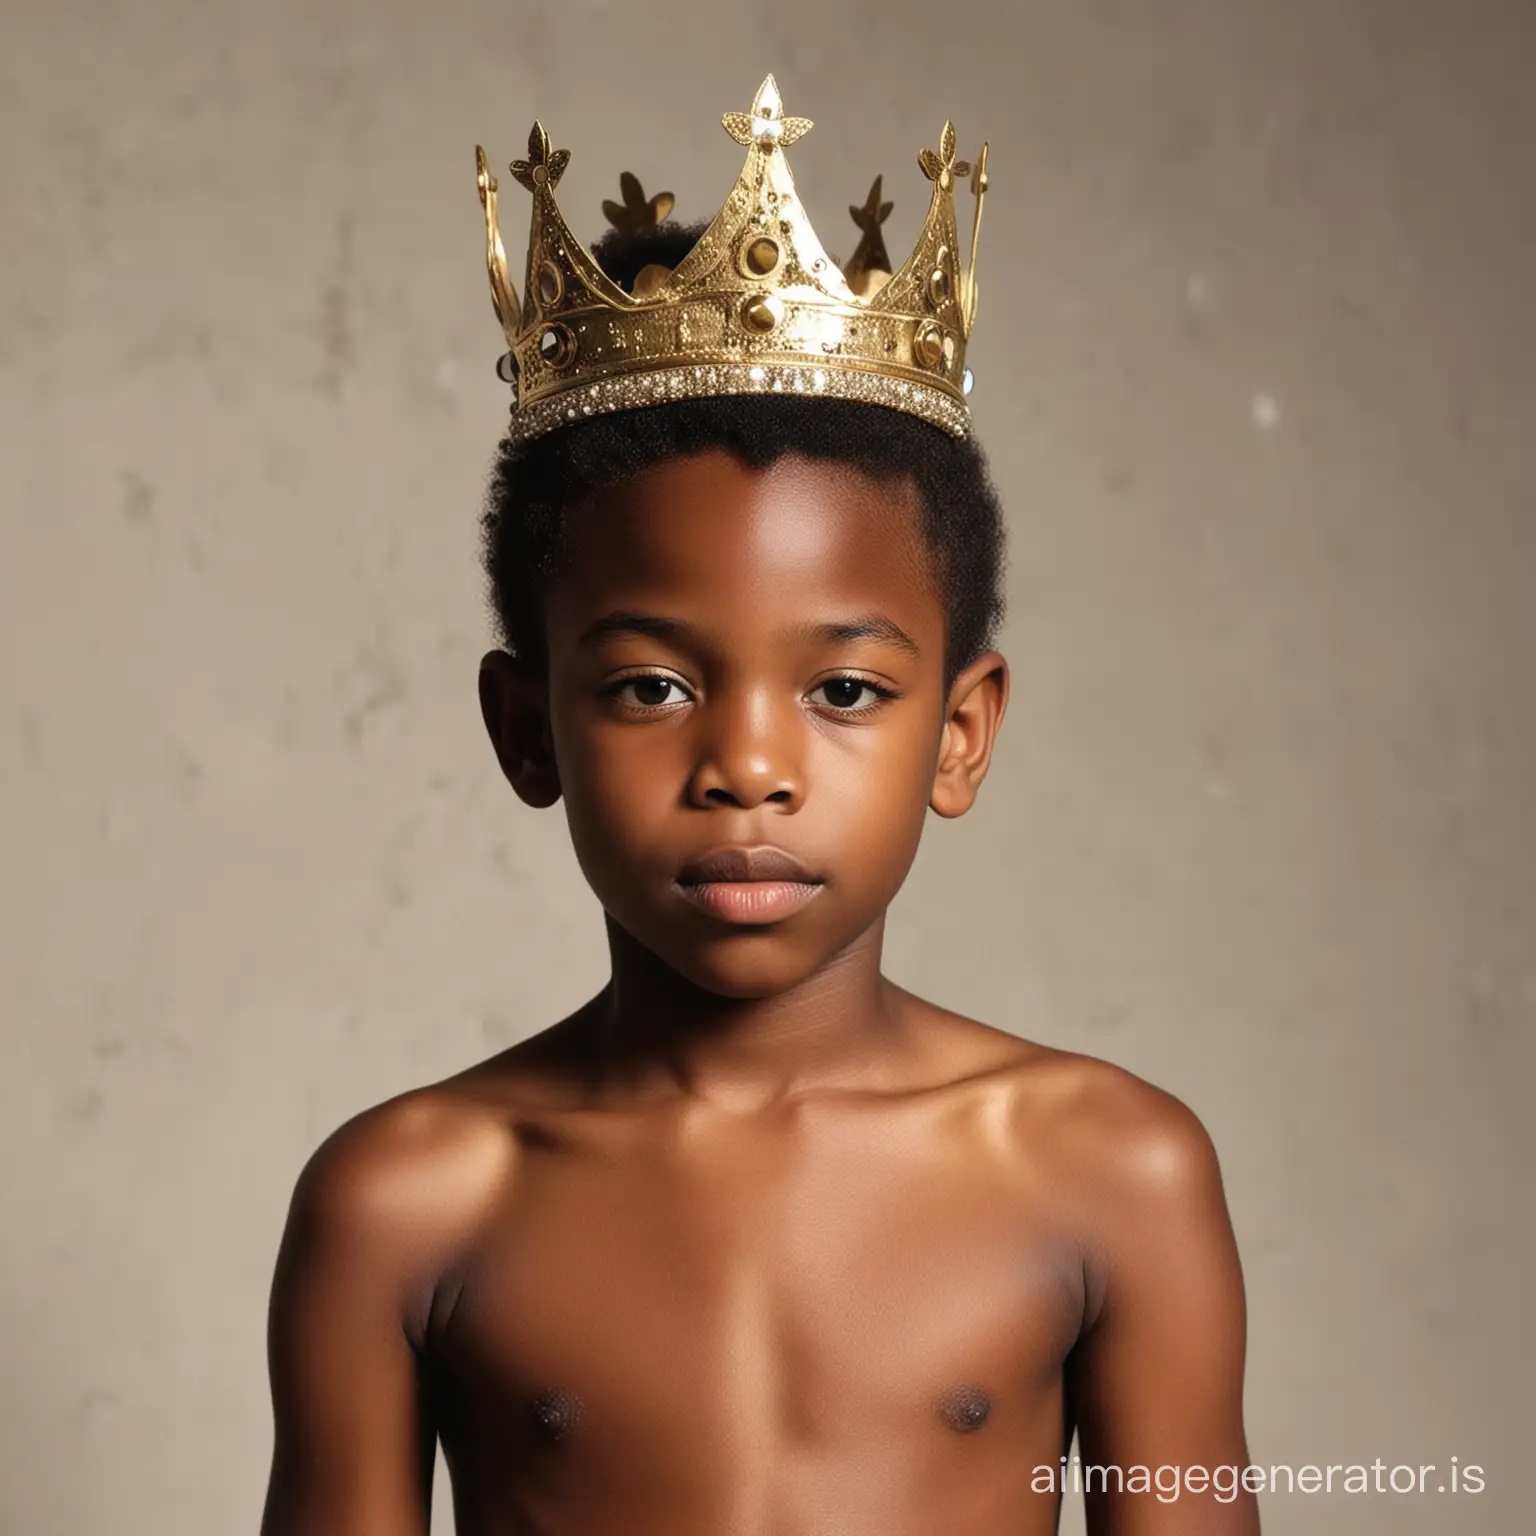 Young-African-American-Boy-Wearing-Crown